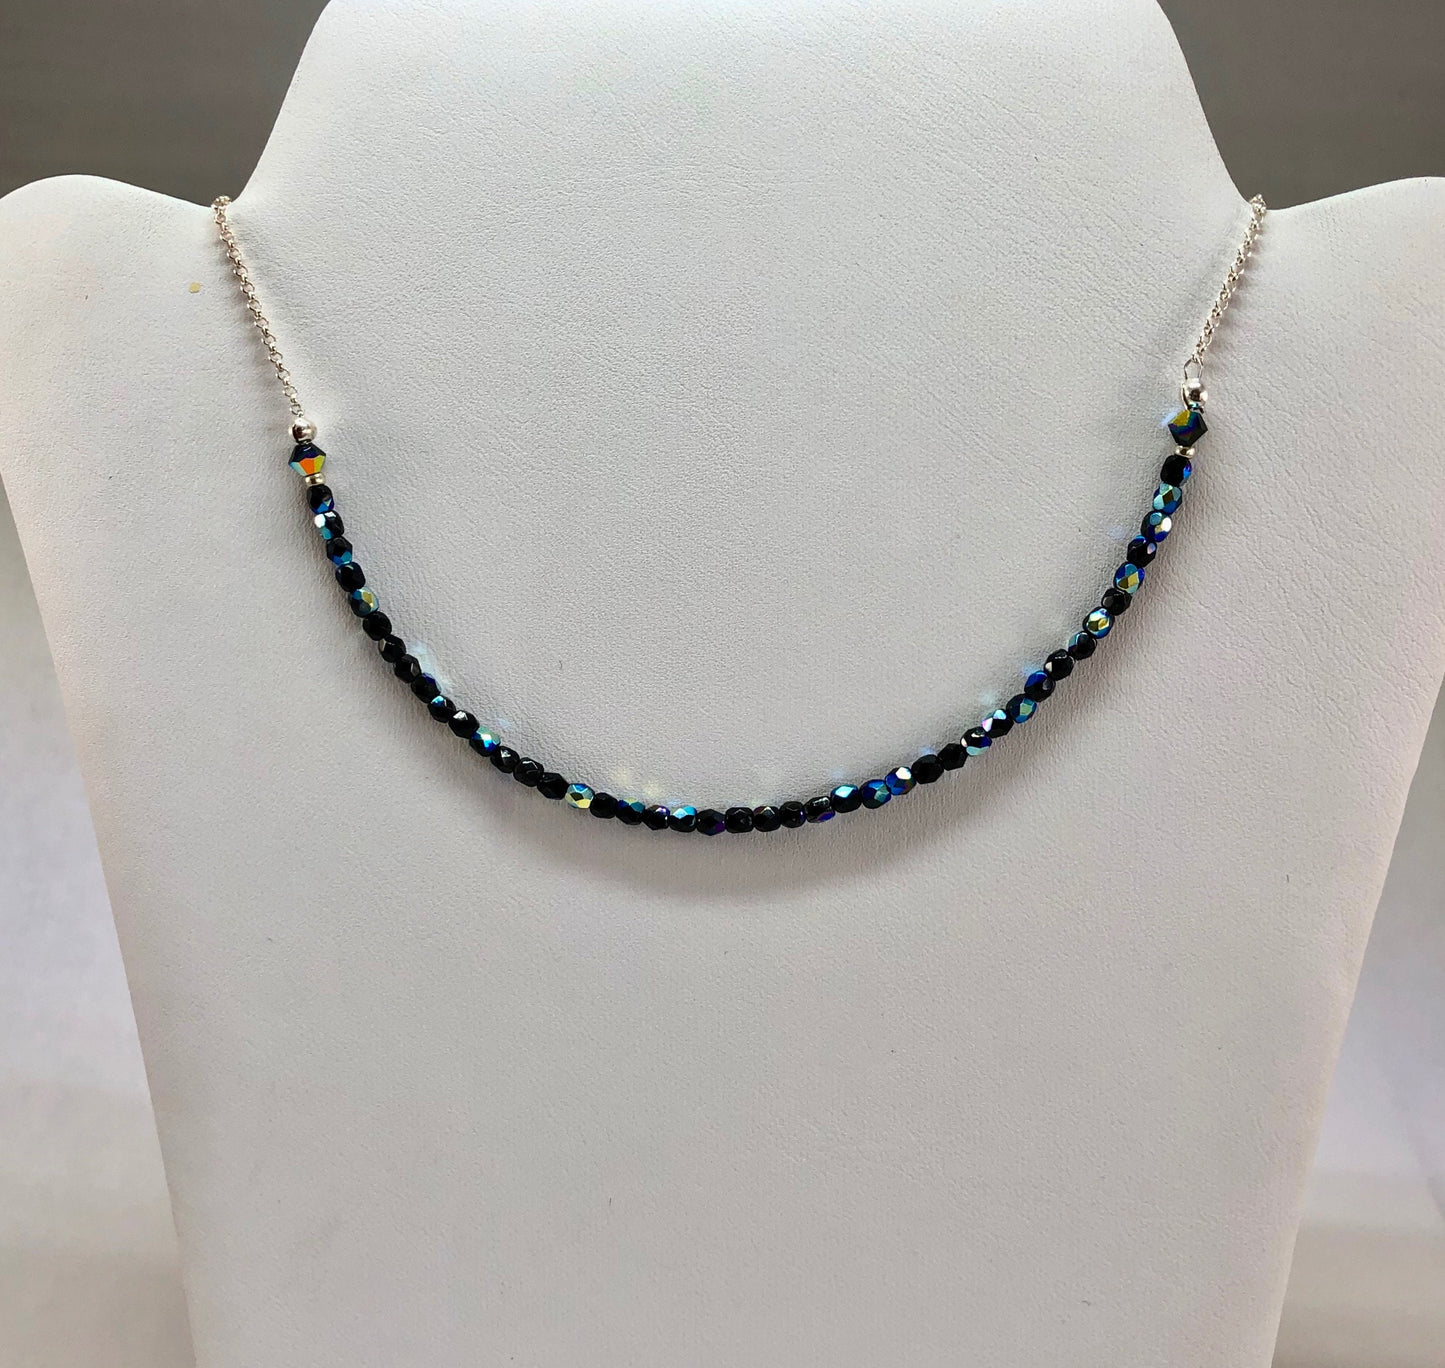 Black crystal and sterling silver choker necklace.